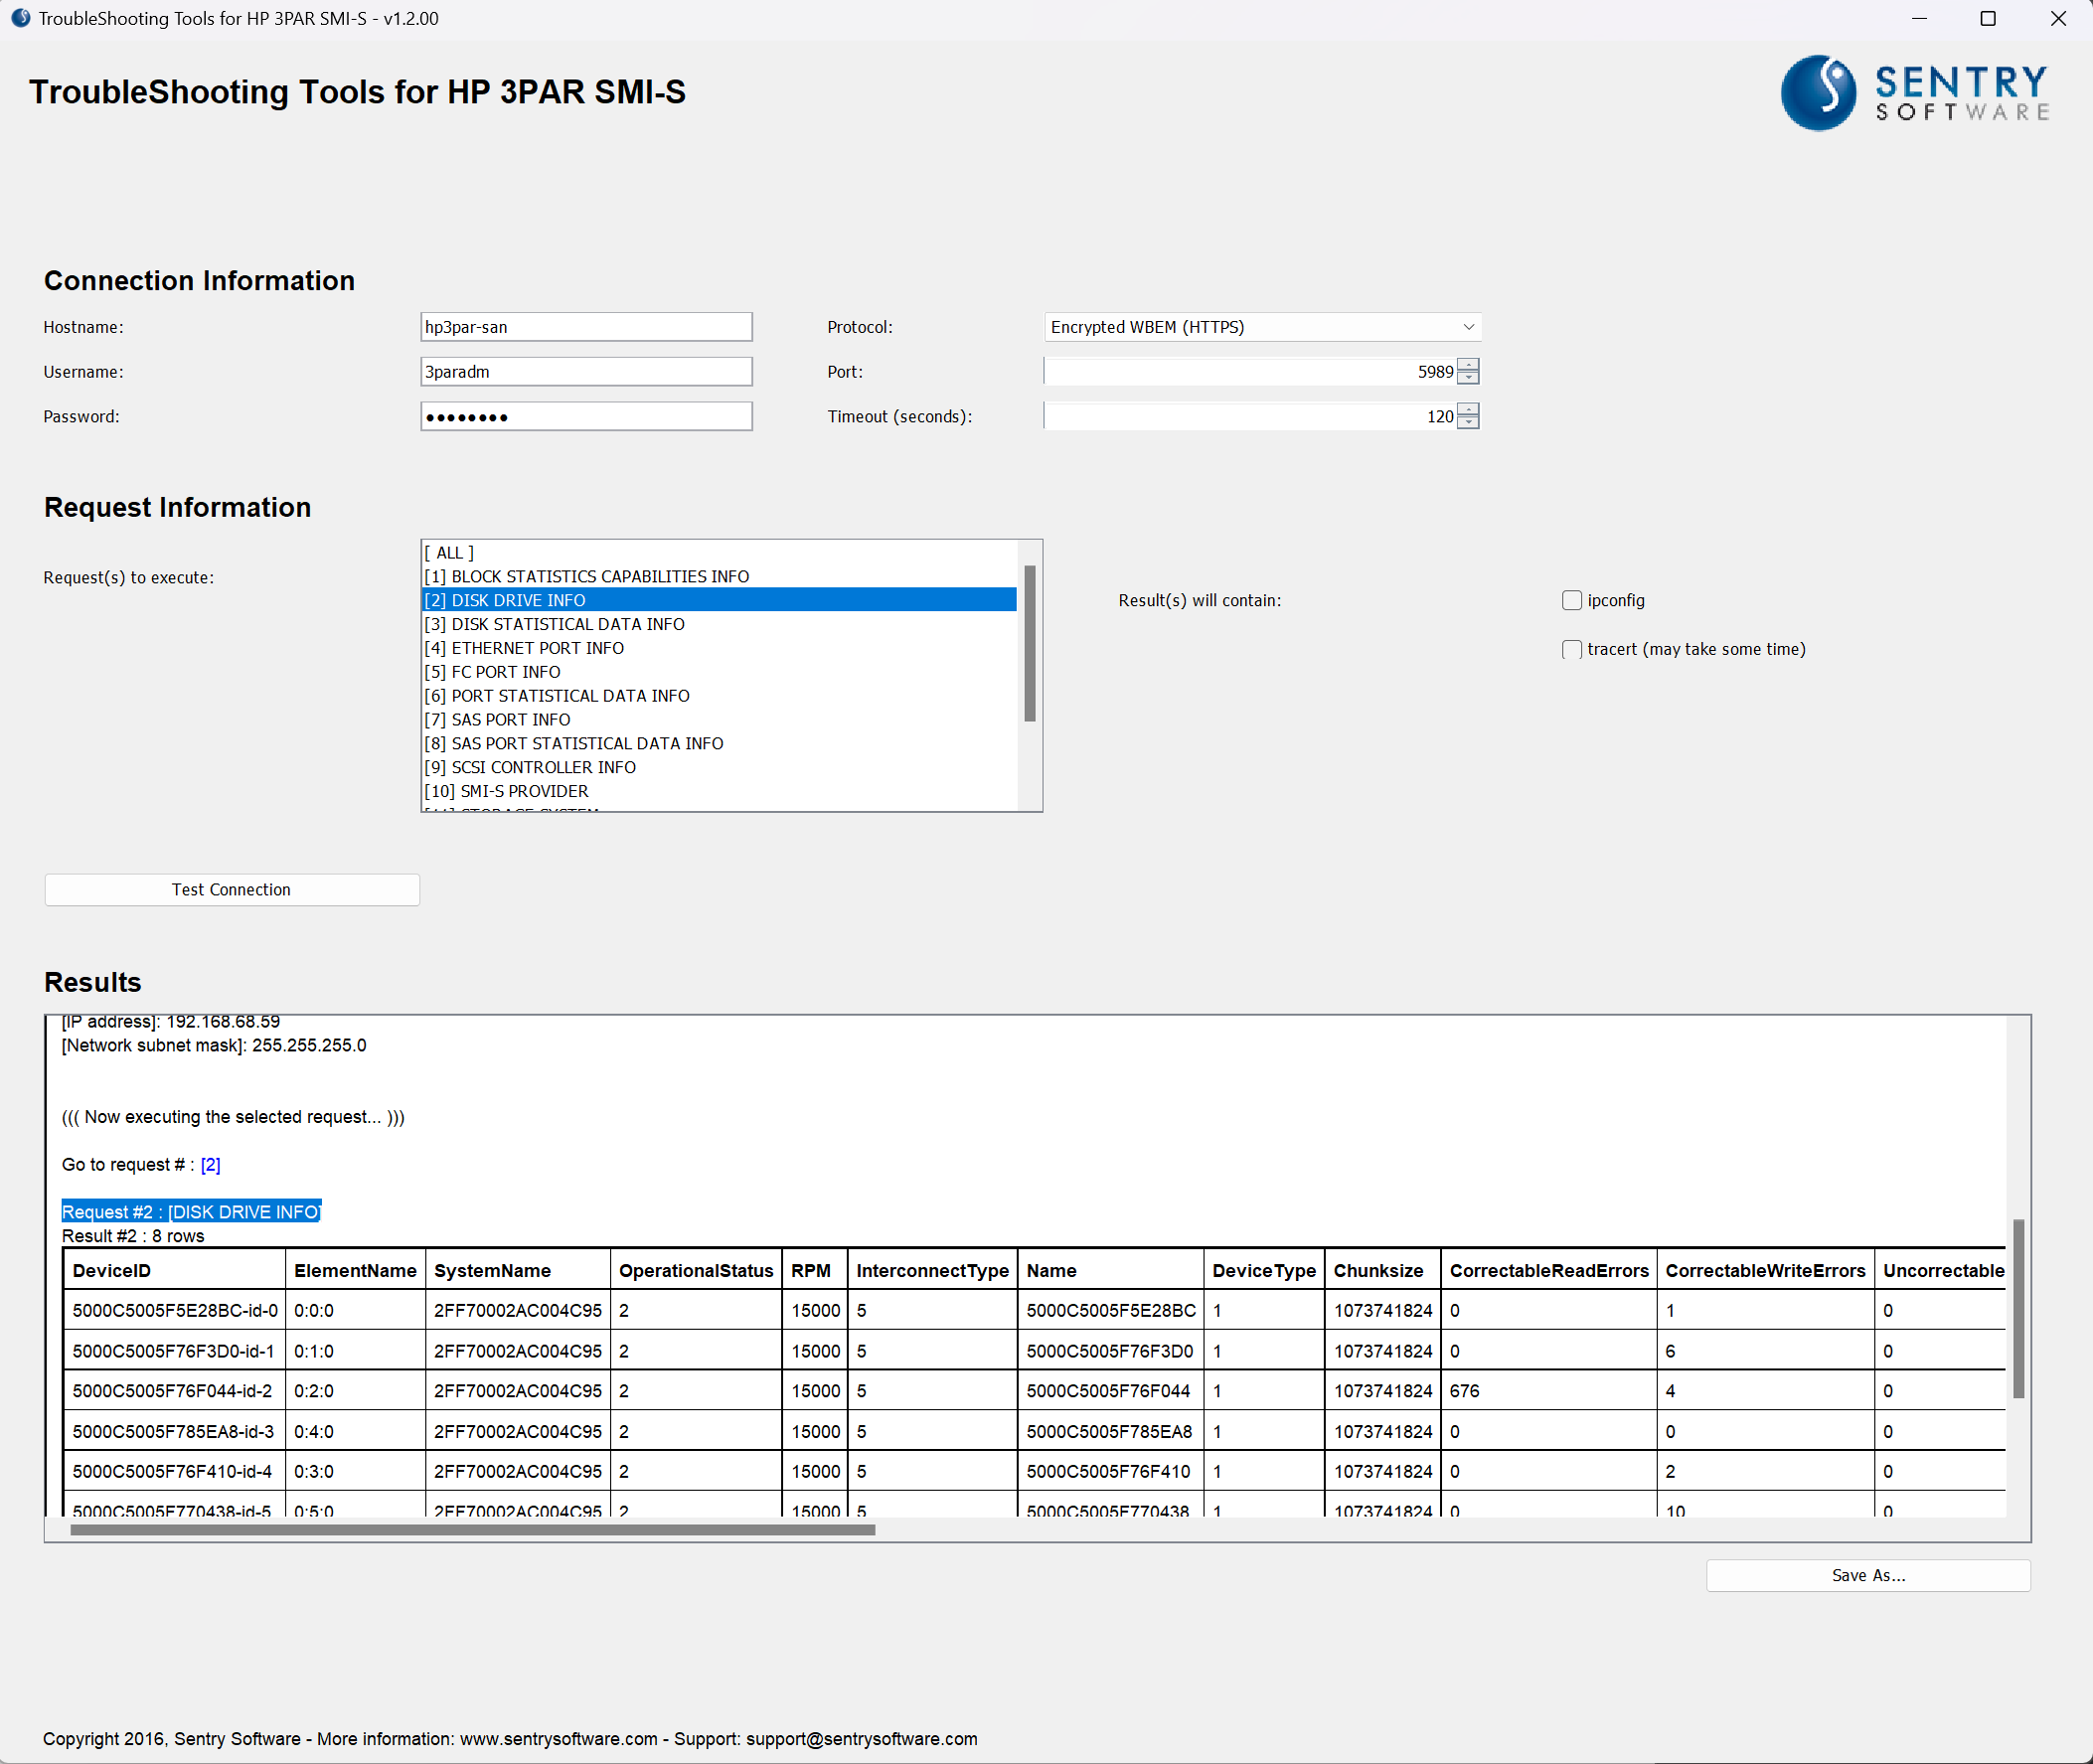 Verifying with the HP 3PAR Troubleshooting Tool